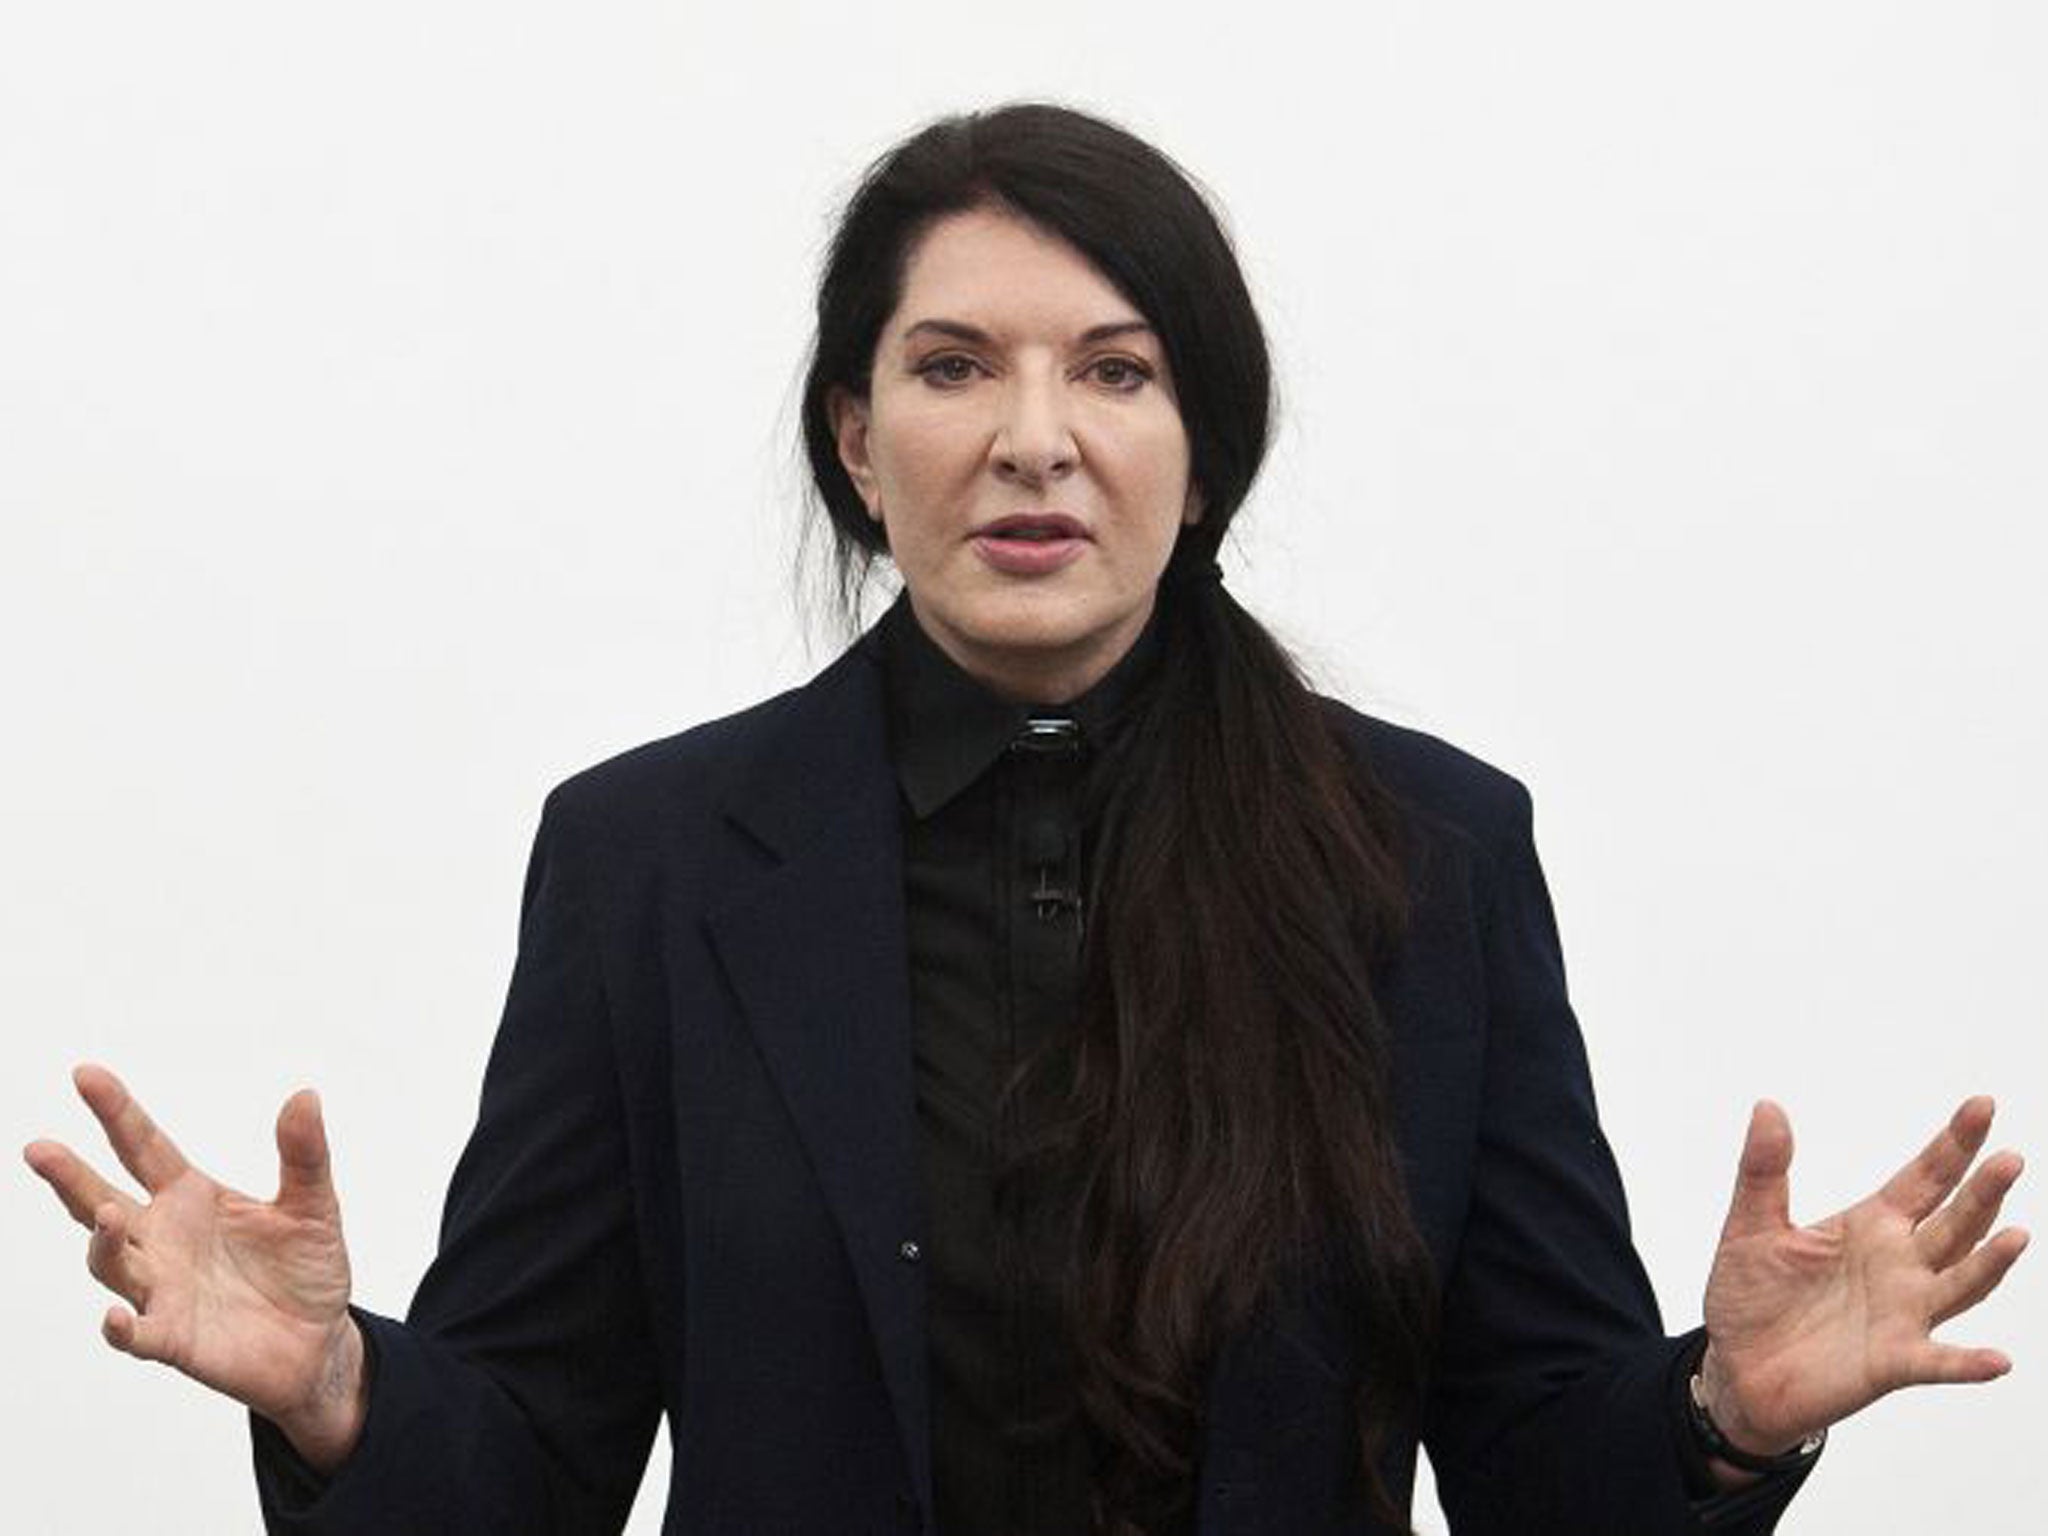 Performance artist Marina Abramovic has already planned her own, artistic funeral